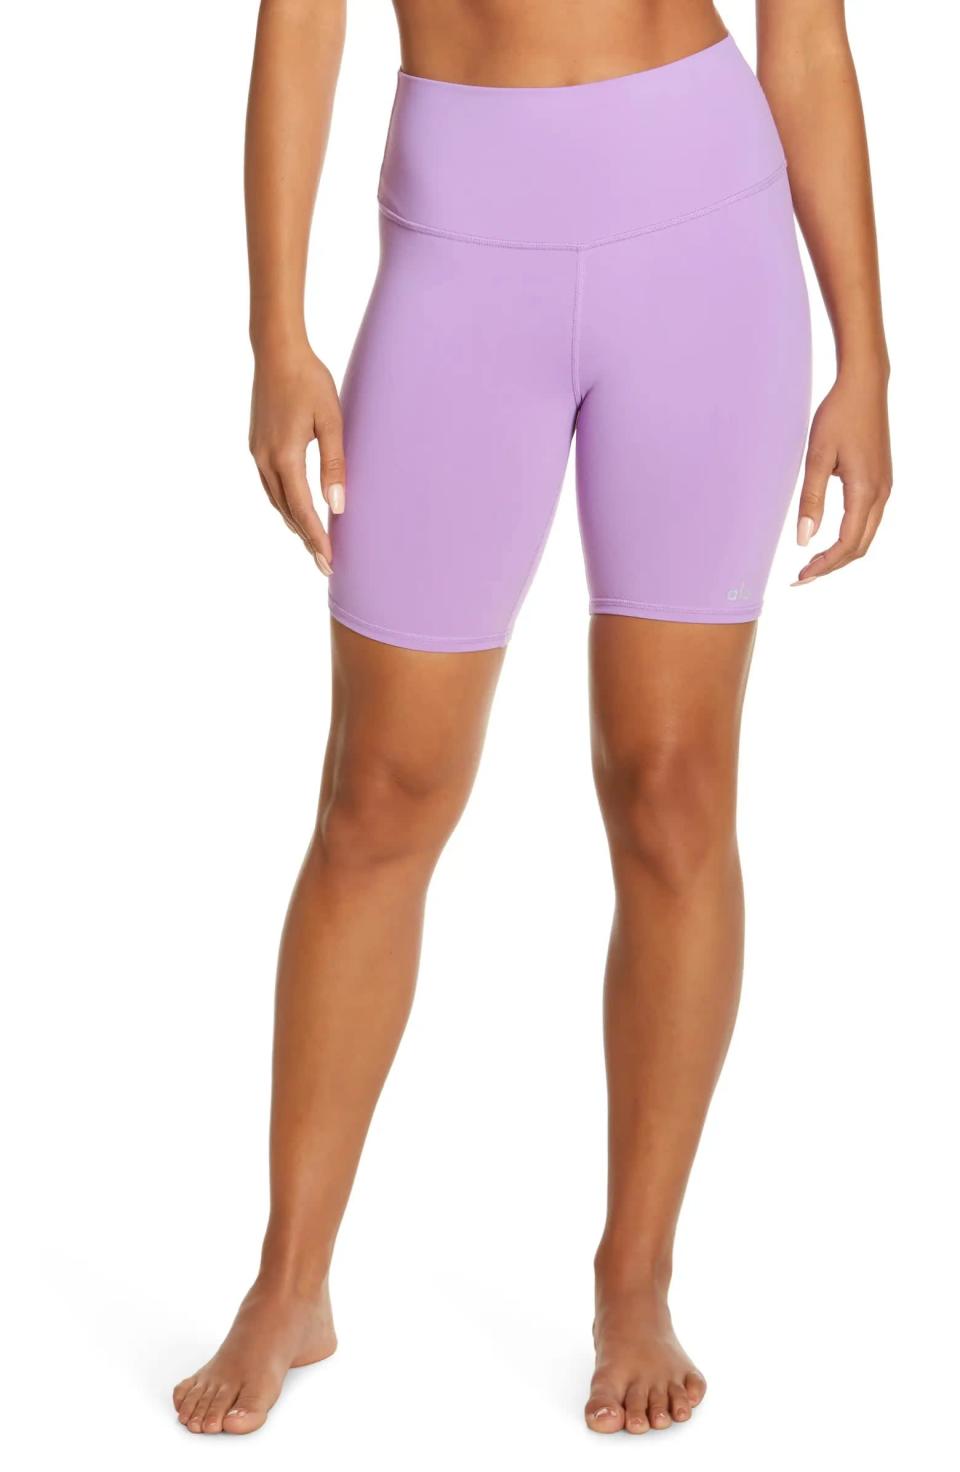 <p>Biker shorts are just better - especially during the summer. And these <span>Alo High Waist Biker Shorts</span> ($40, originally $58) treat the classic biker short style to a serious makeover with a bright orchid (and purple-infused) coloring.</p>